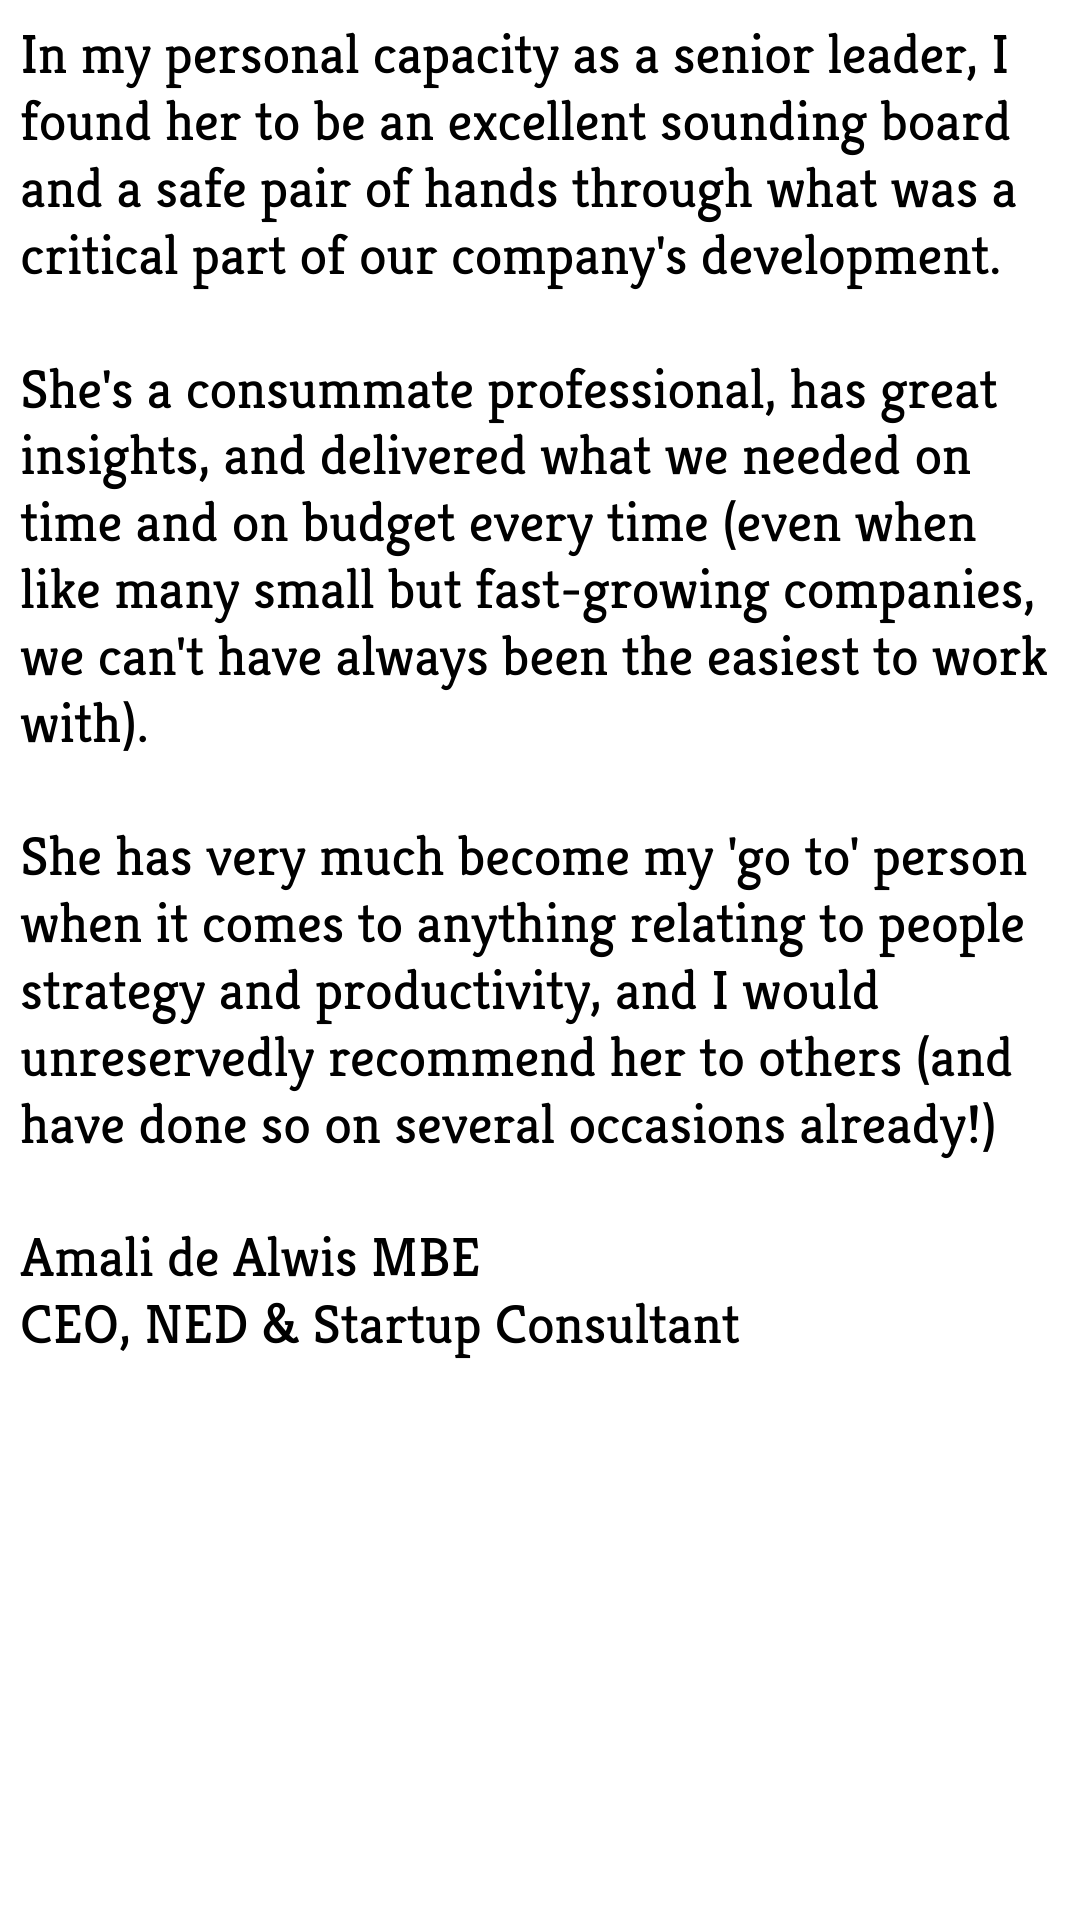 Amali de Alwis MBE, CEO, NED & Startup Consultant